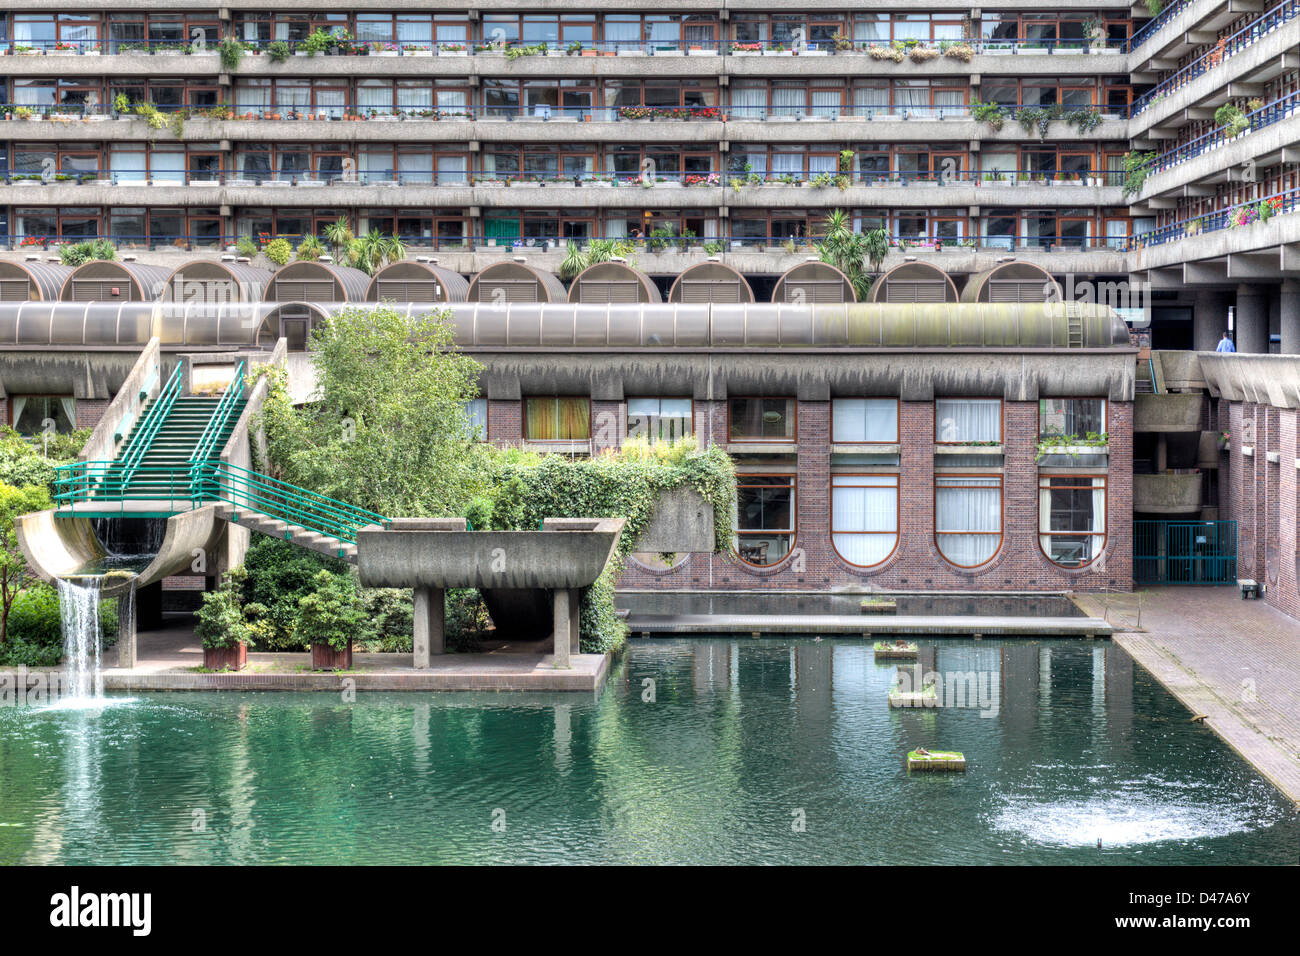 The Barbican Center in London is one of the most popular and famous examples of Brutalist architecture in the world. Stock Photo